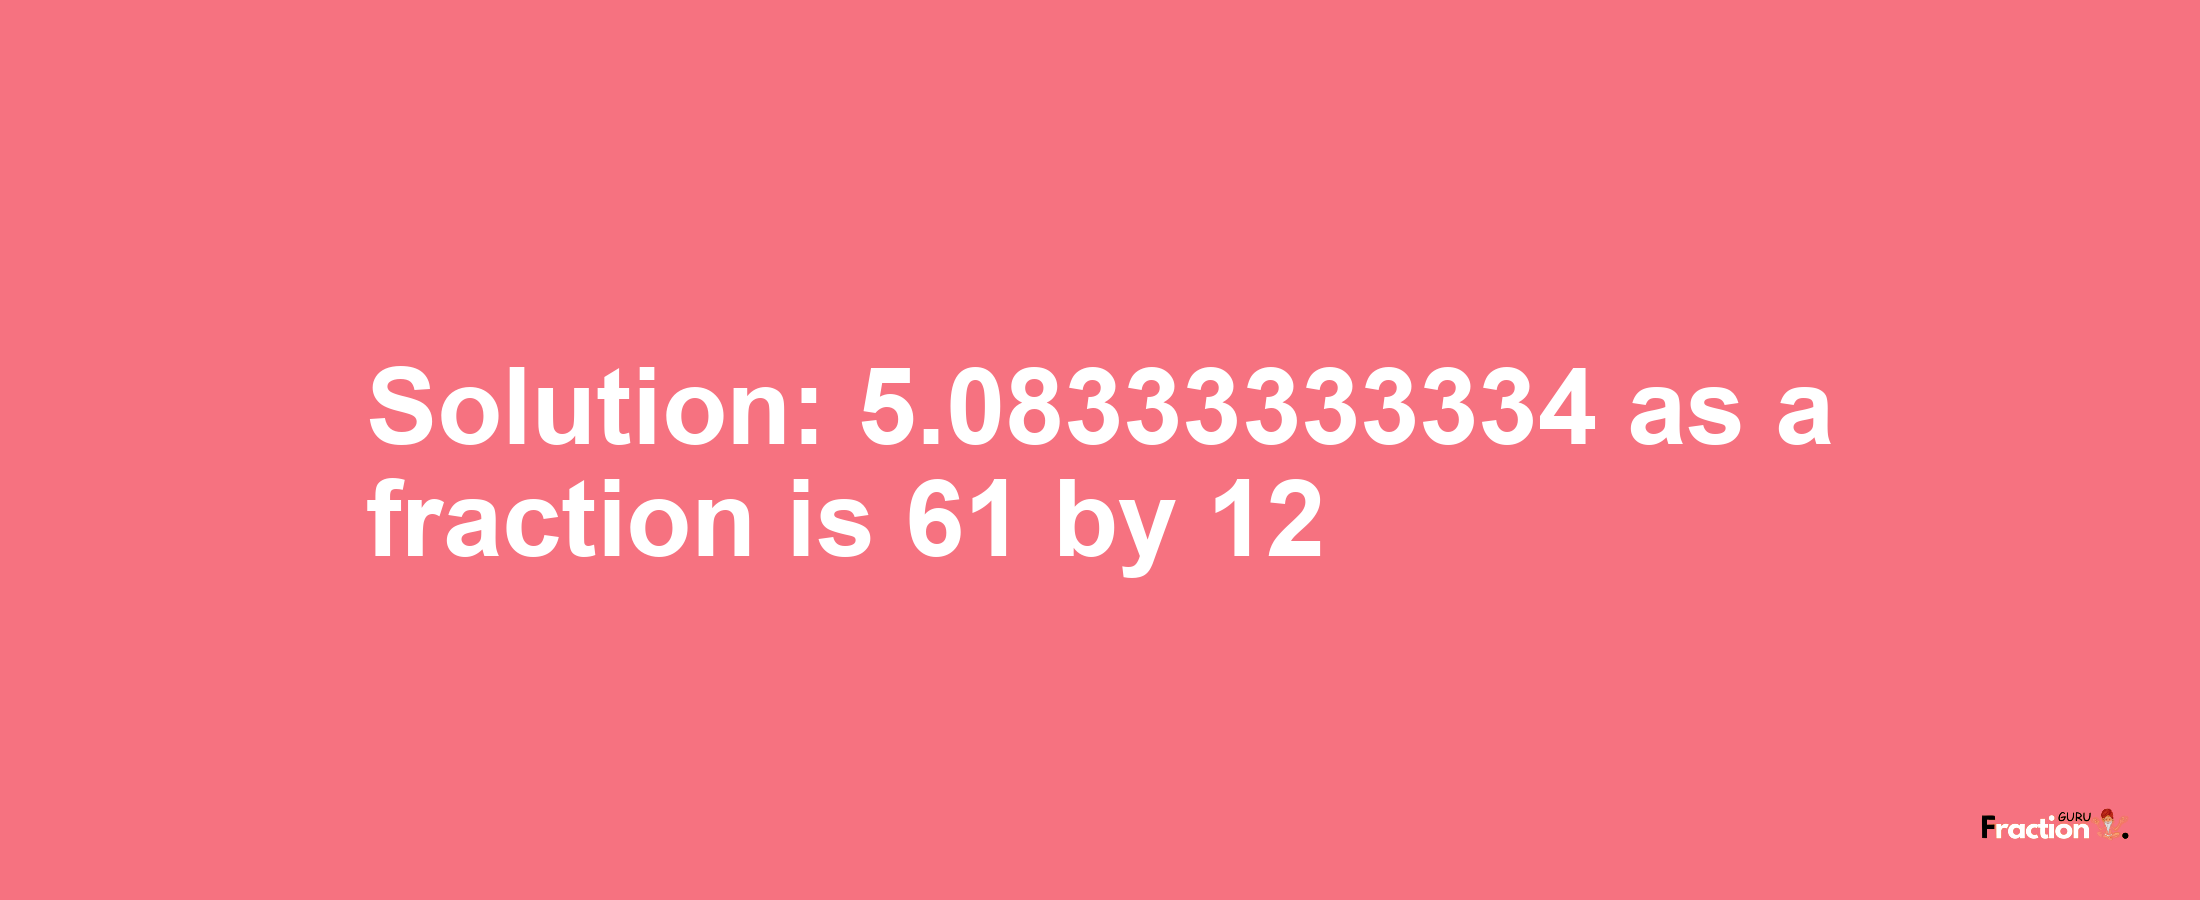 Solution:5.08333333334 as a fraction is 61/12